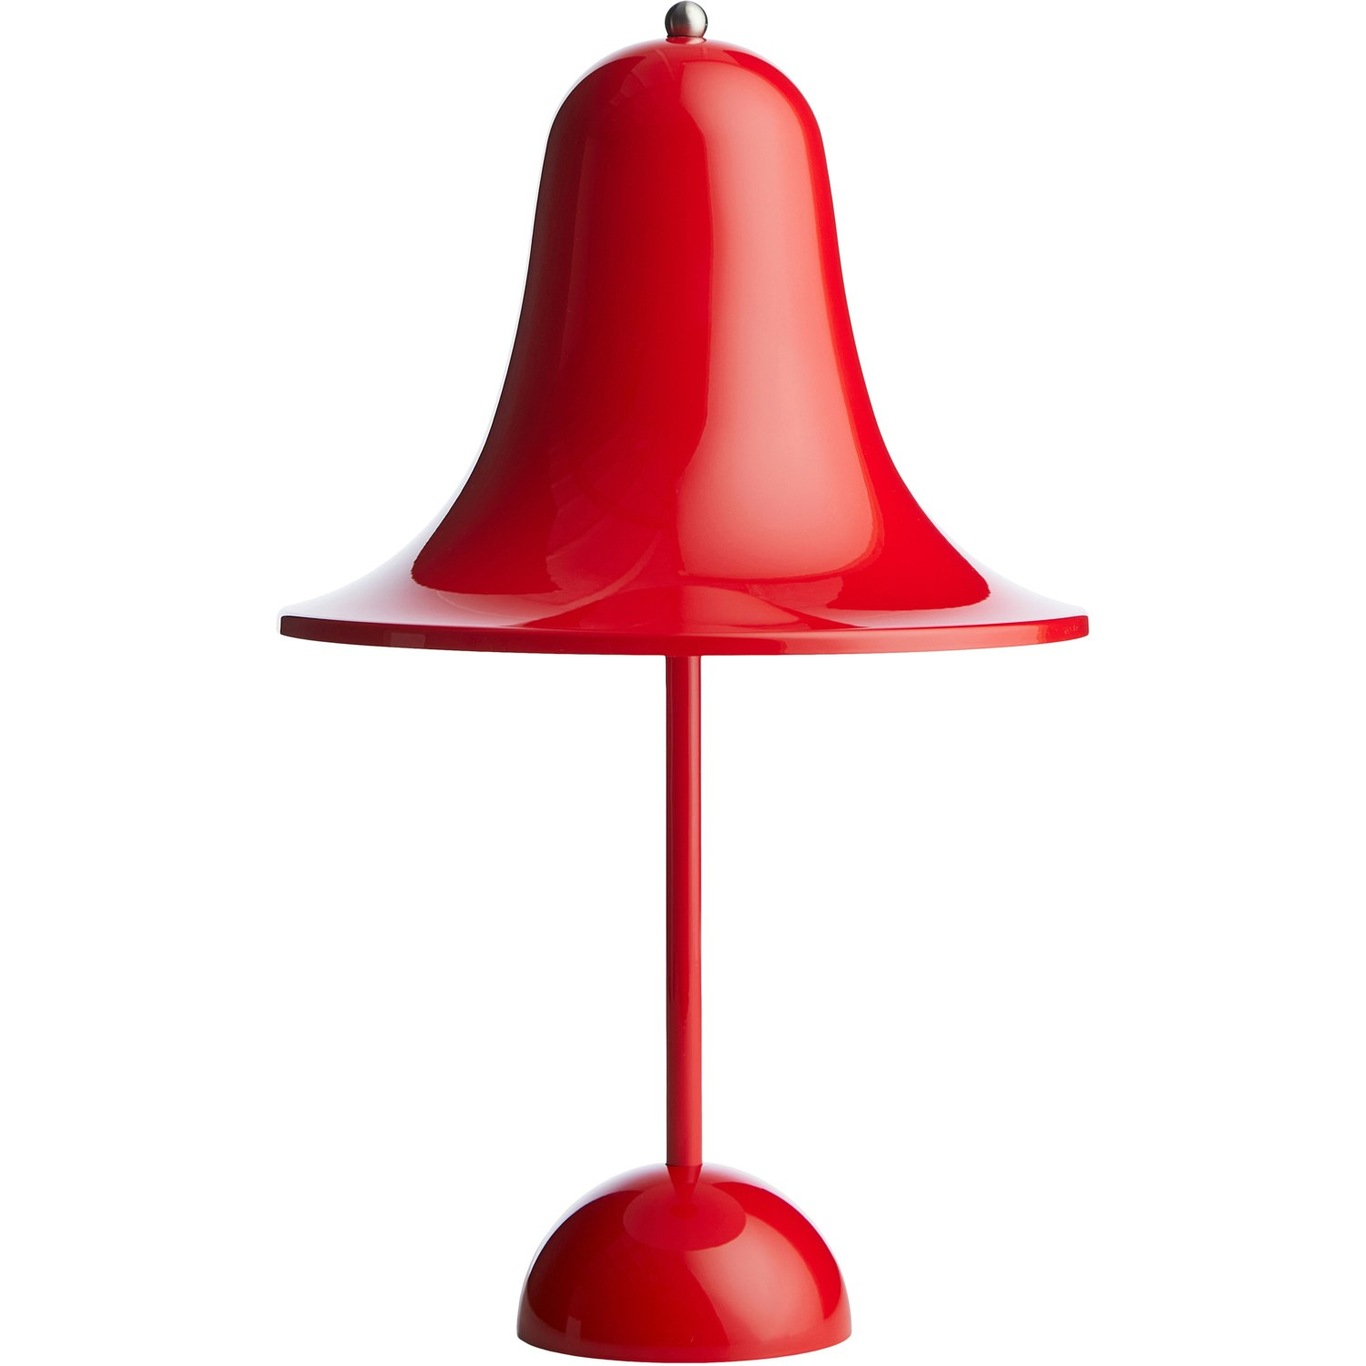 Pantop Table Lamp Portable, Bright Red